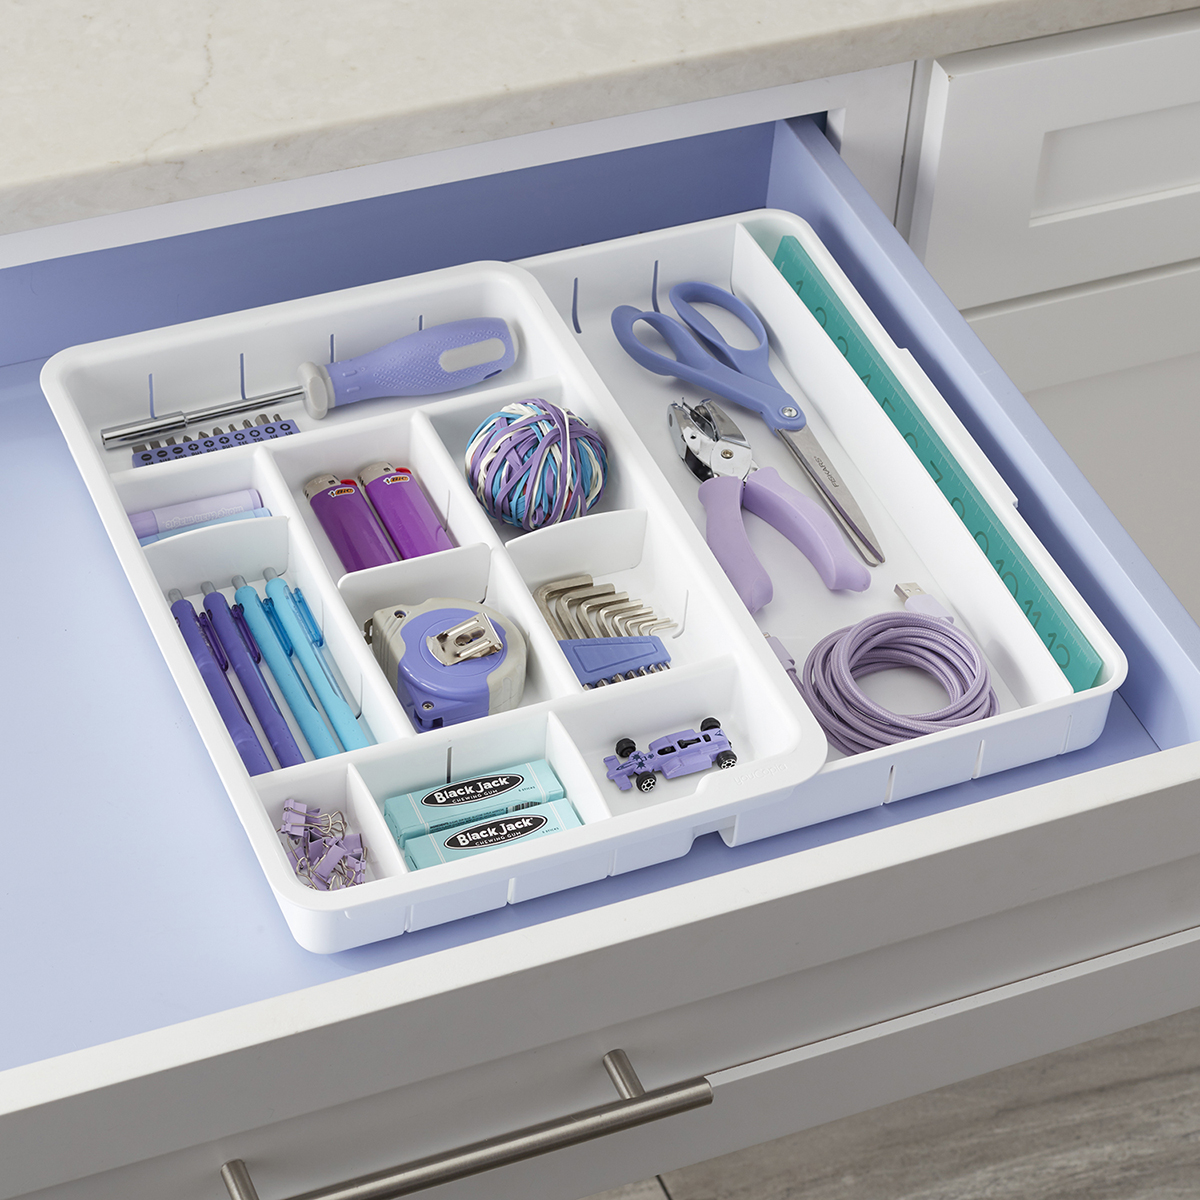 https://www.containerstore.com/catalogimages/401744/10083172-YouCopia-Expandable-Organiz.jpg